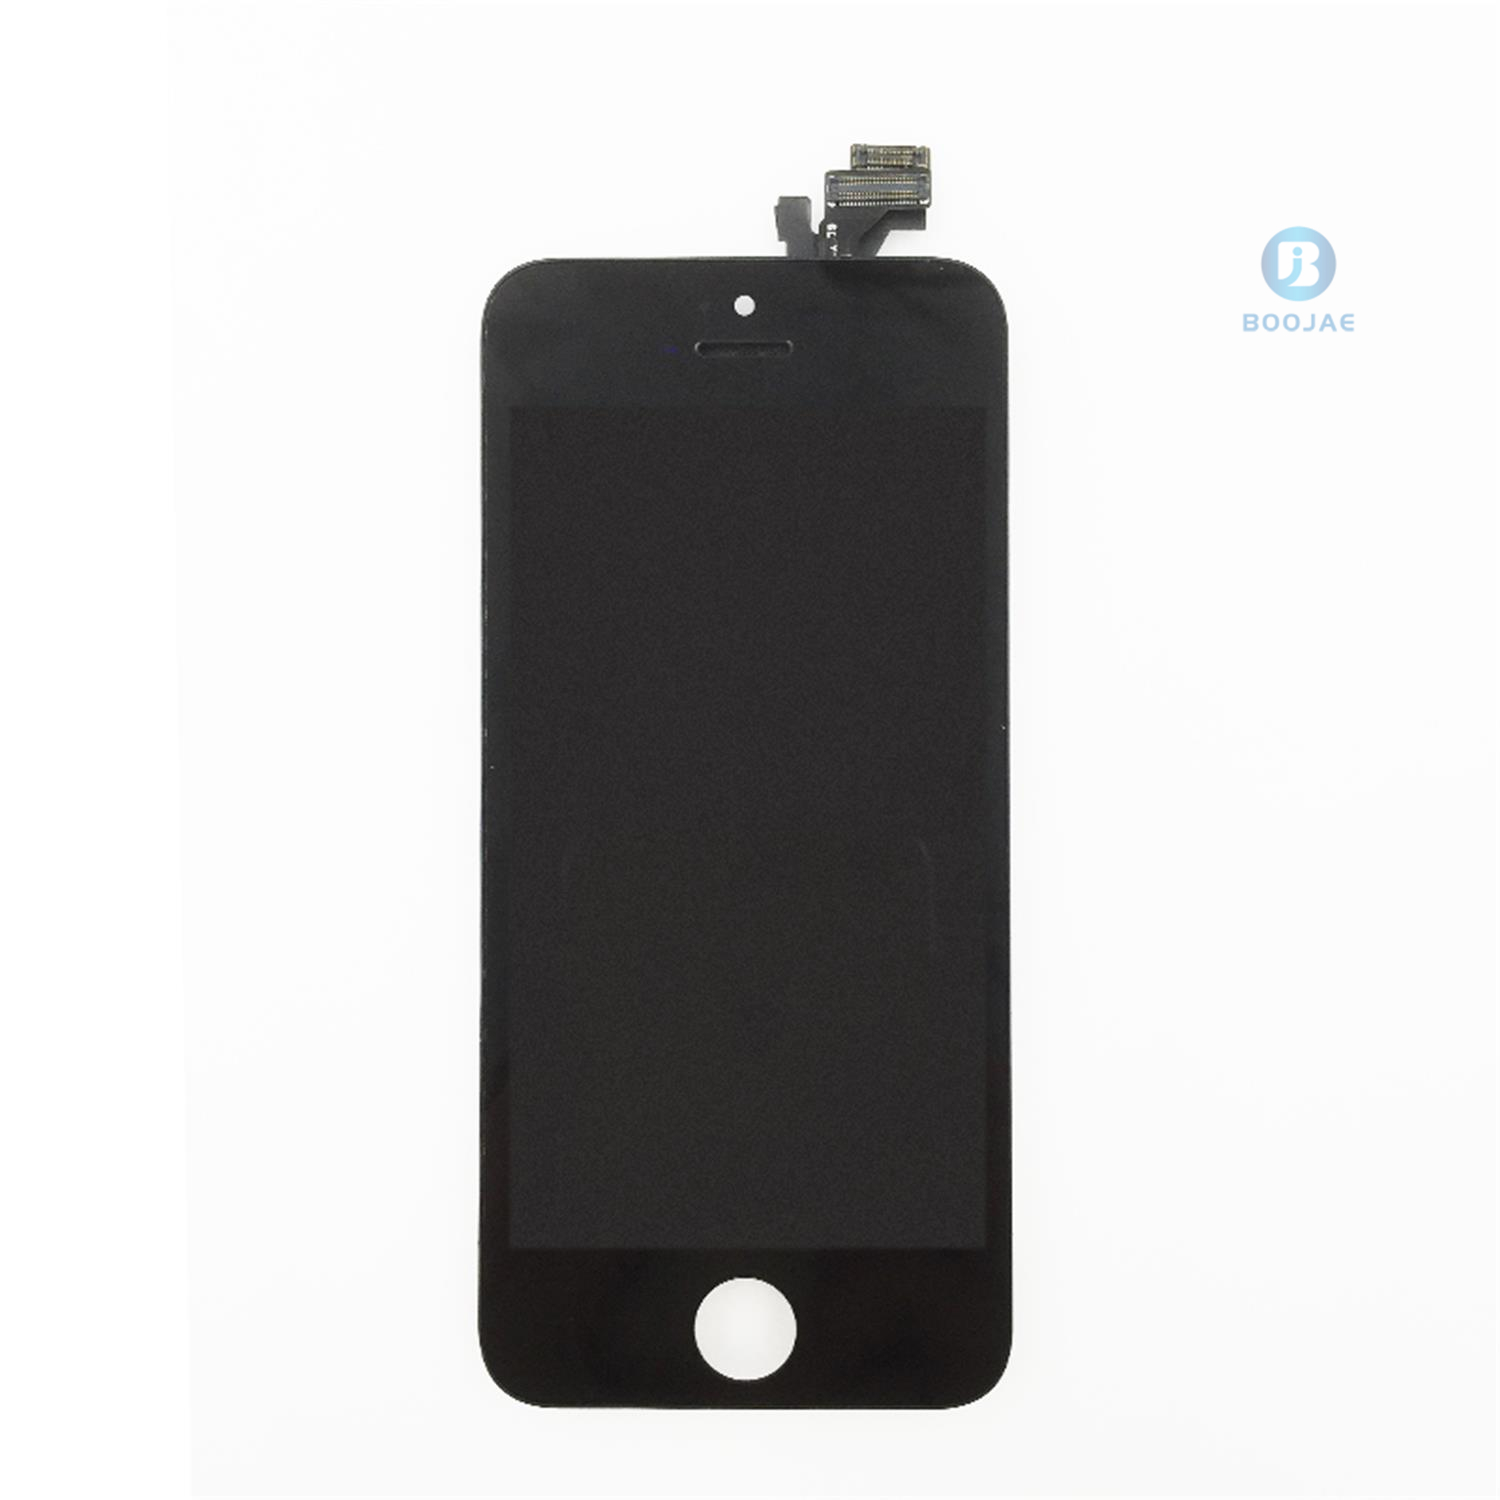 For iPhone 5 LCD Screen Display and Touch Panel Digitizer Assembly Replacement